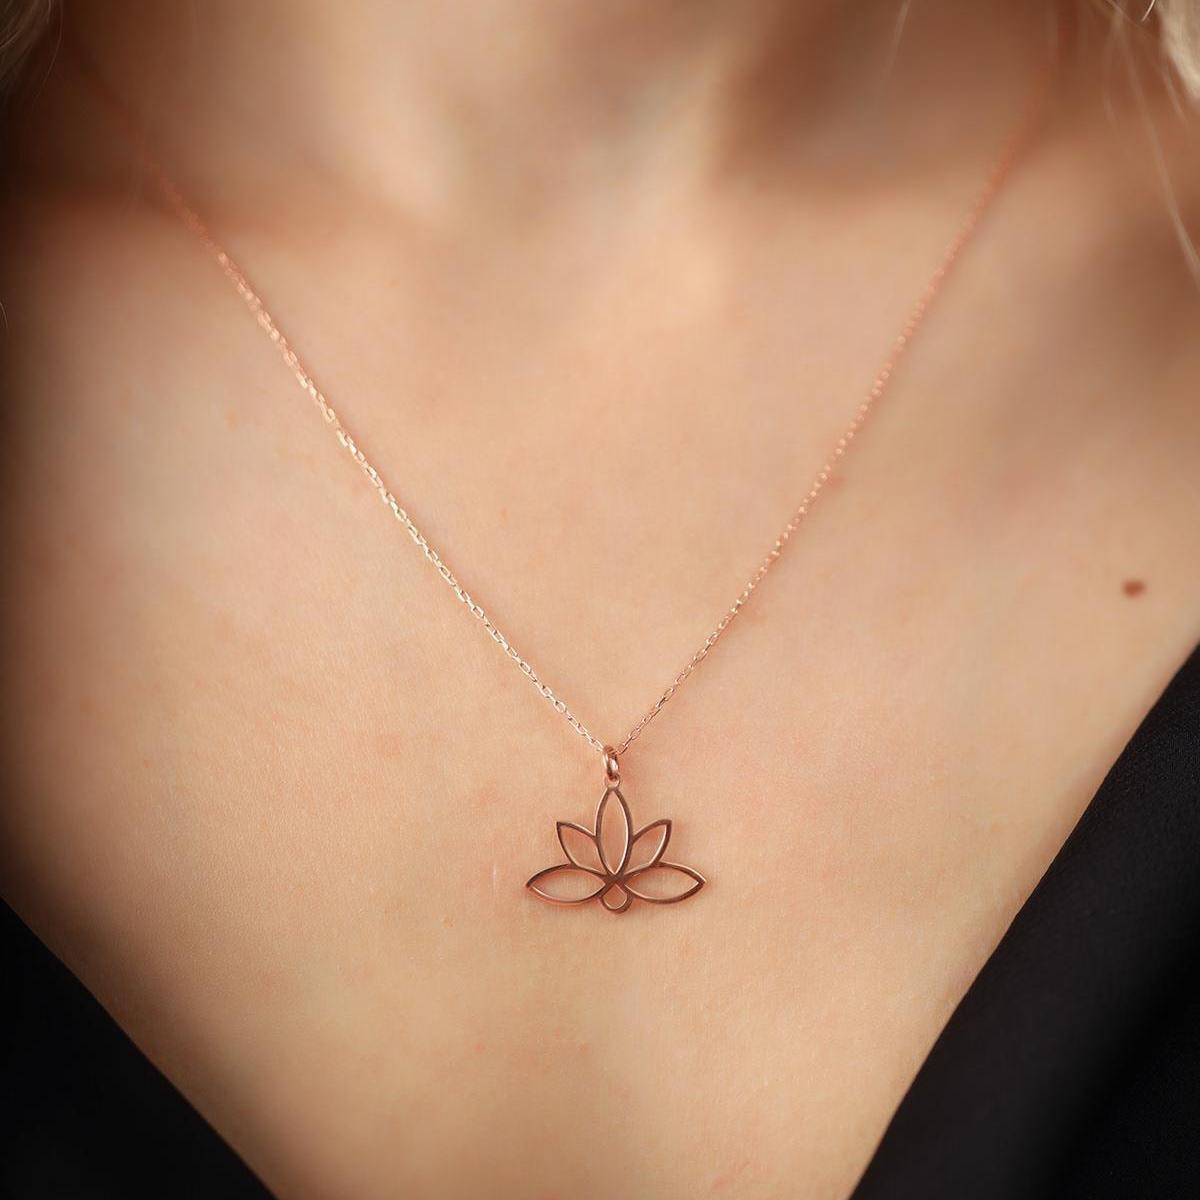 Lotus Necklace Gold • Yoga Symbol Necklace • Lotus Flower Necklace - Trending Silver Gifts